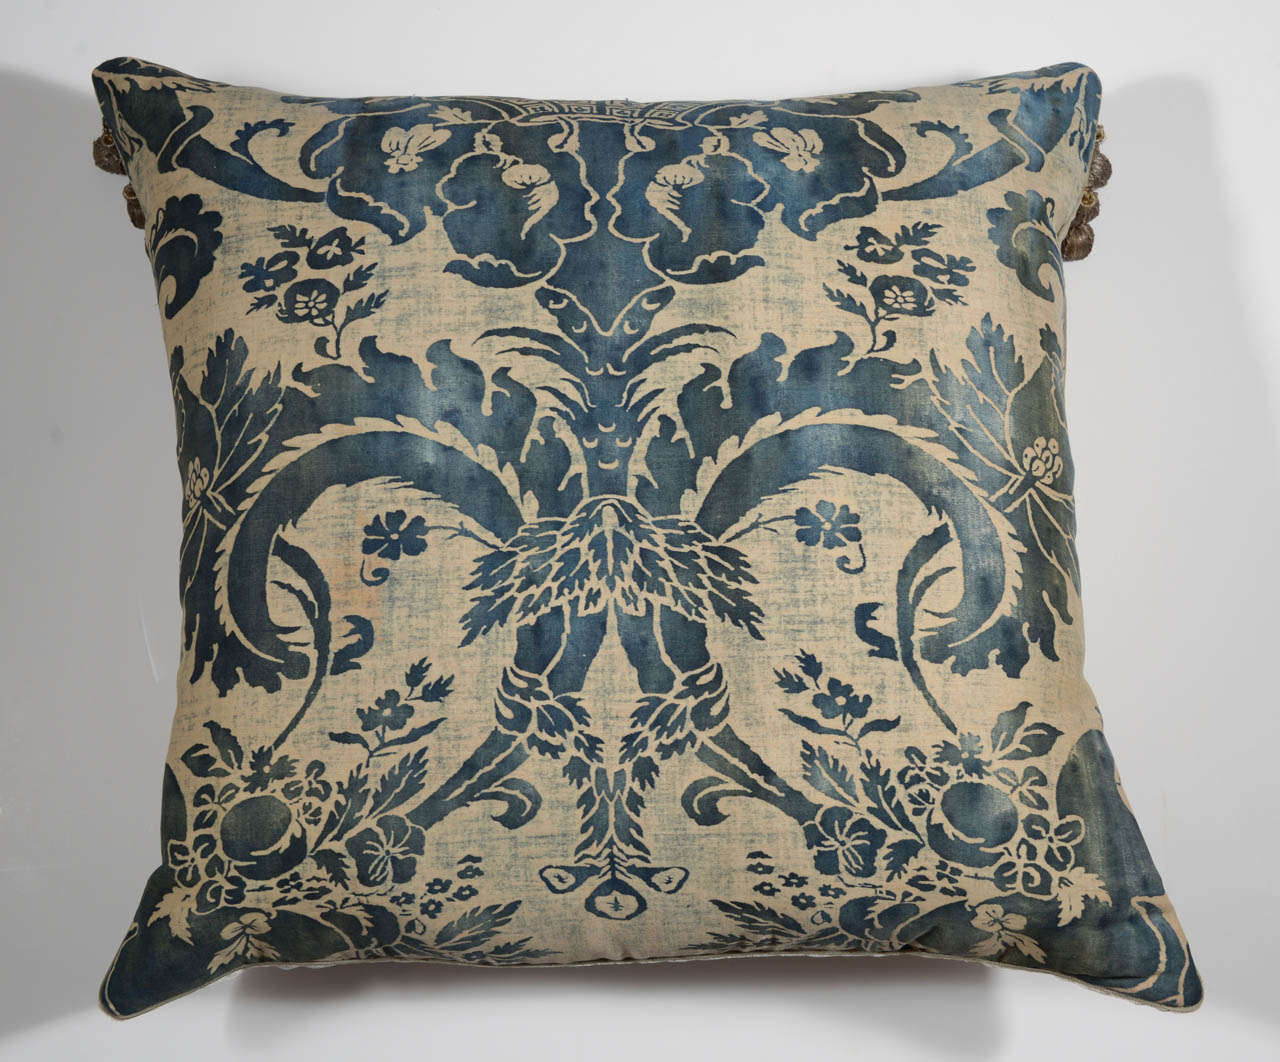 We found this custom made pillow with vintage rare Fortuny fabric from the 1940's. All Fortuny fabric is hand blocked in Venice, from historical patterns.  Beautiful large 